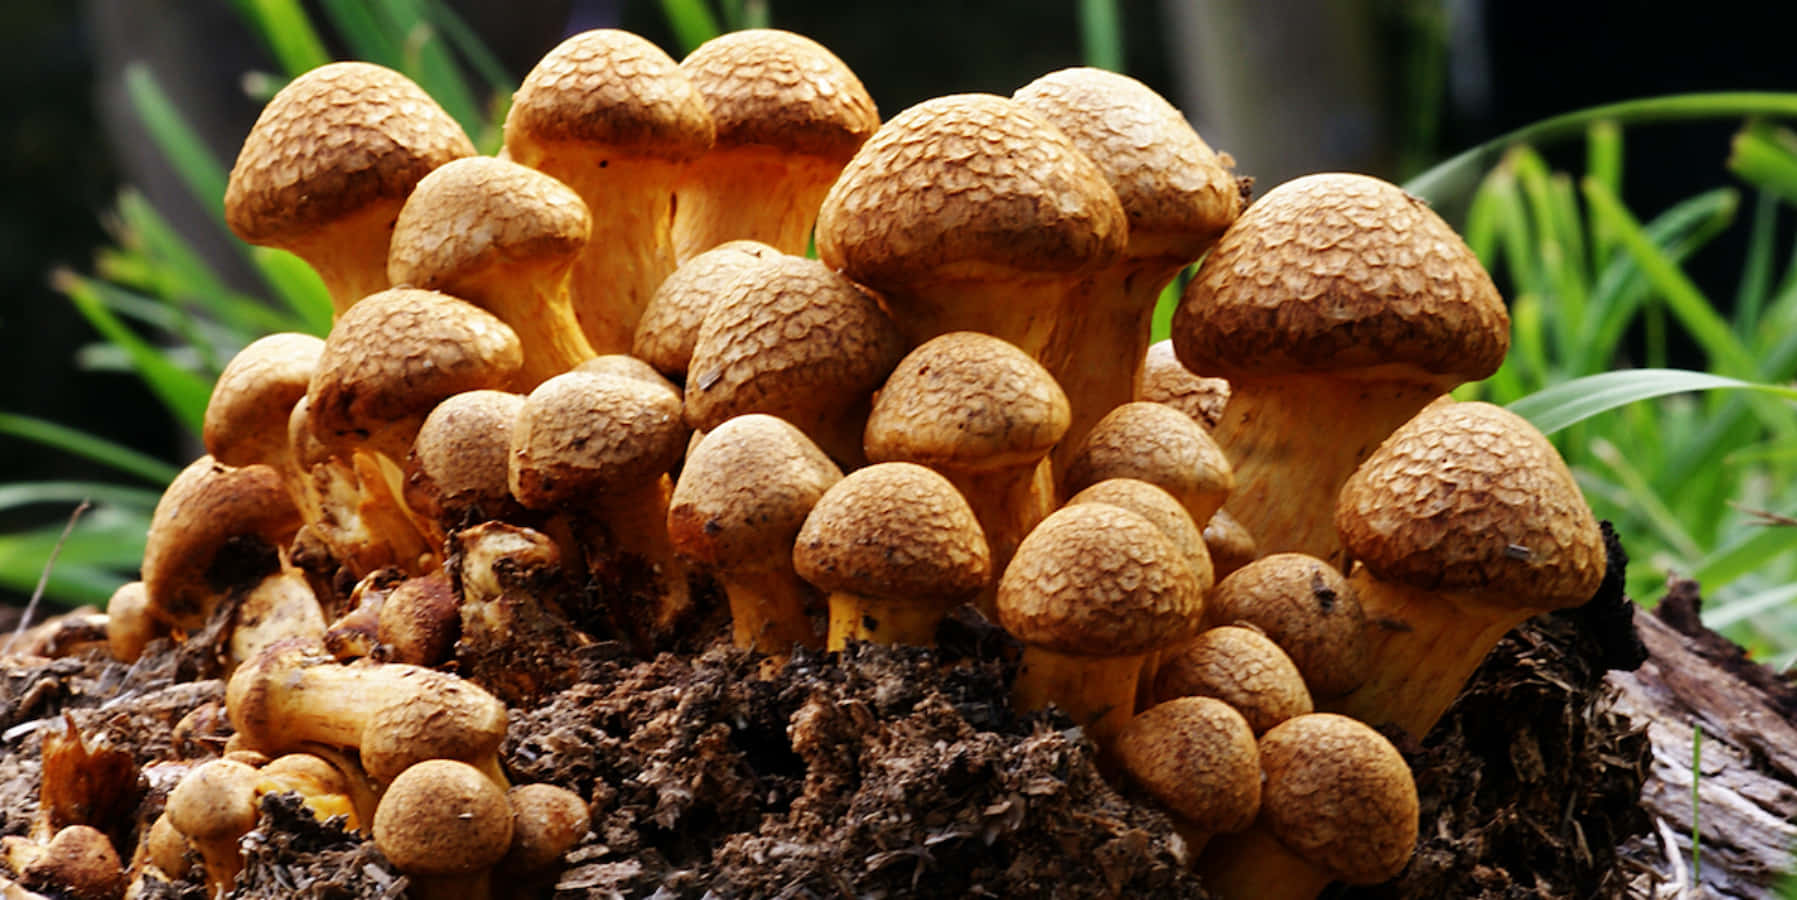 A Group Of Mushrooms Growing On A Stump